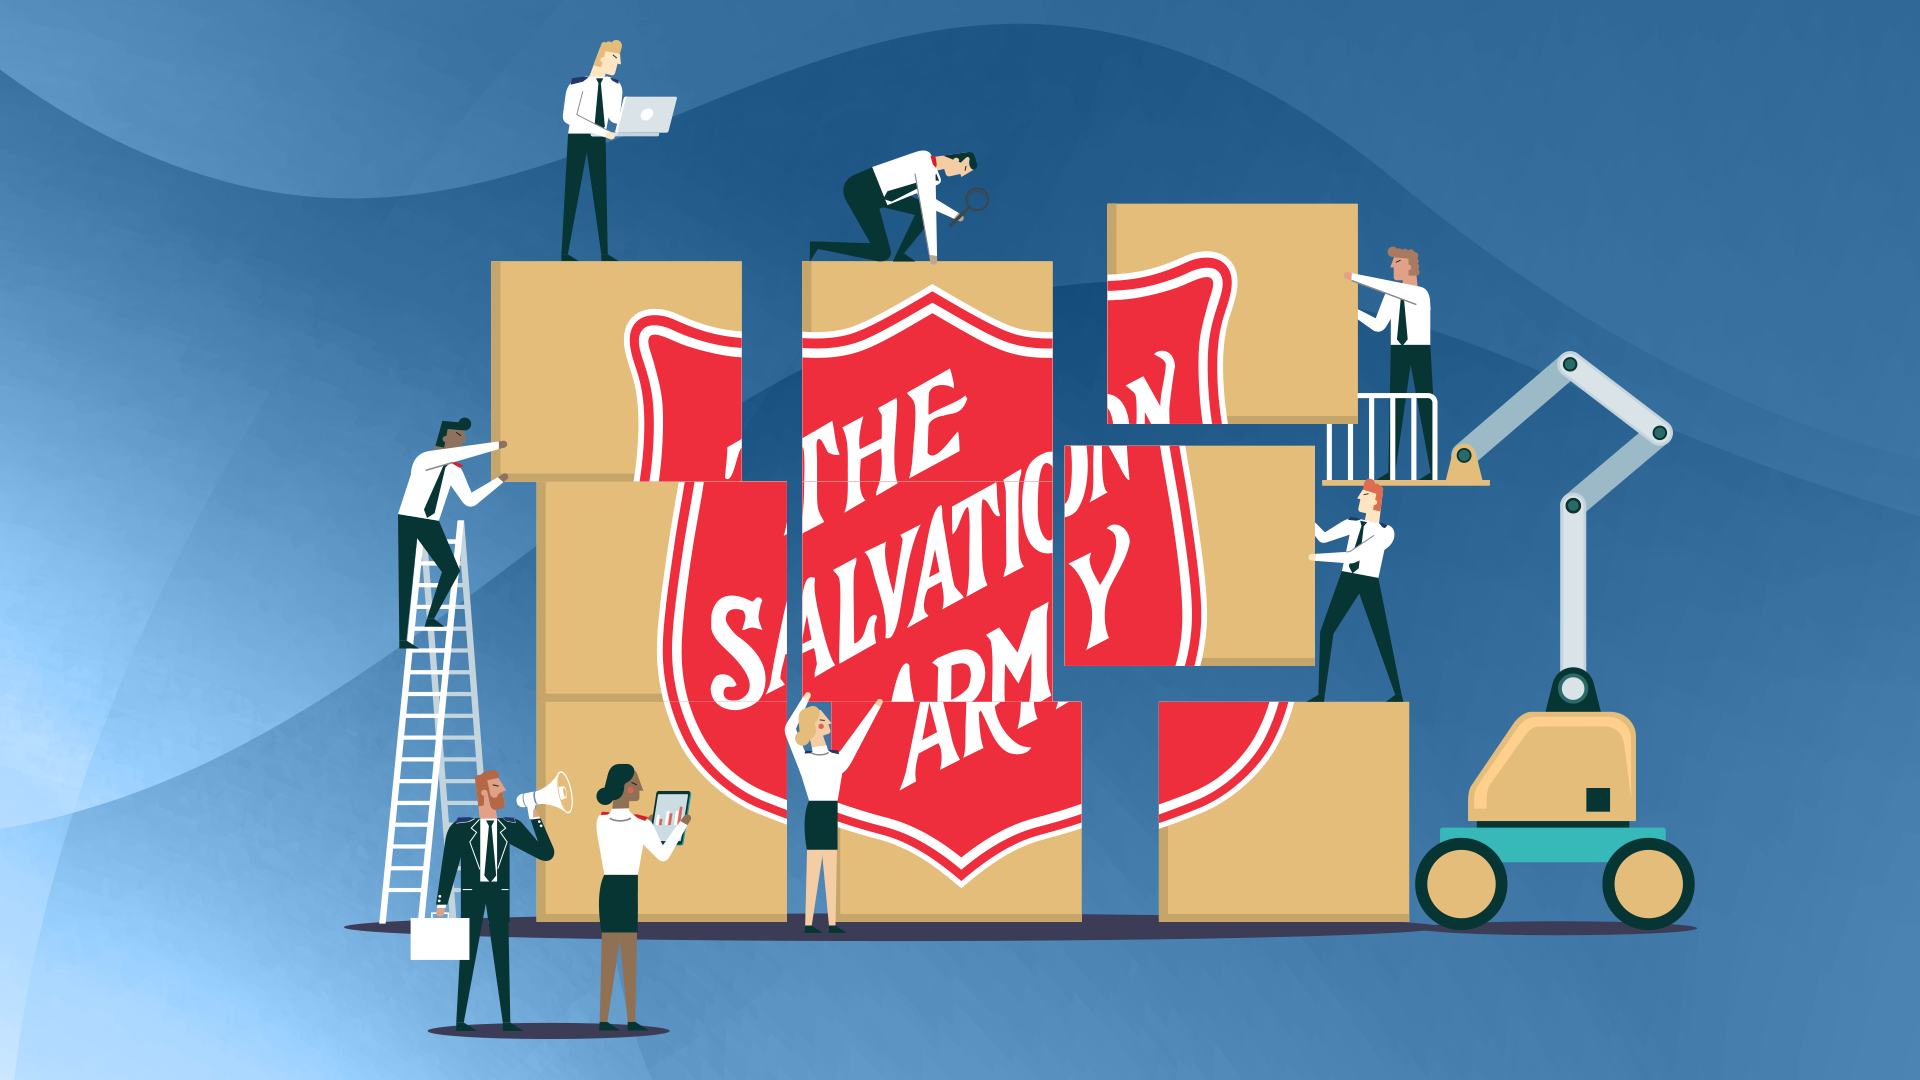 The Salvation Army's mission